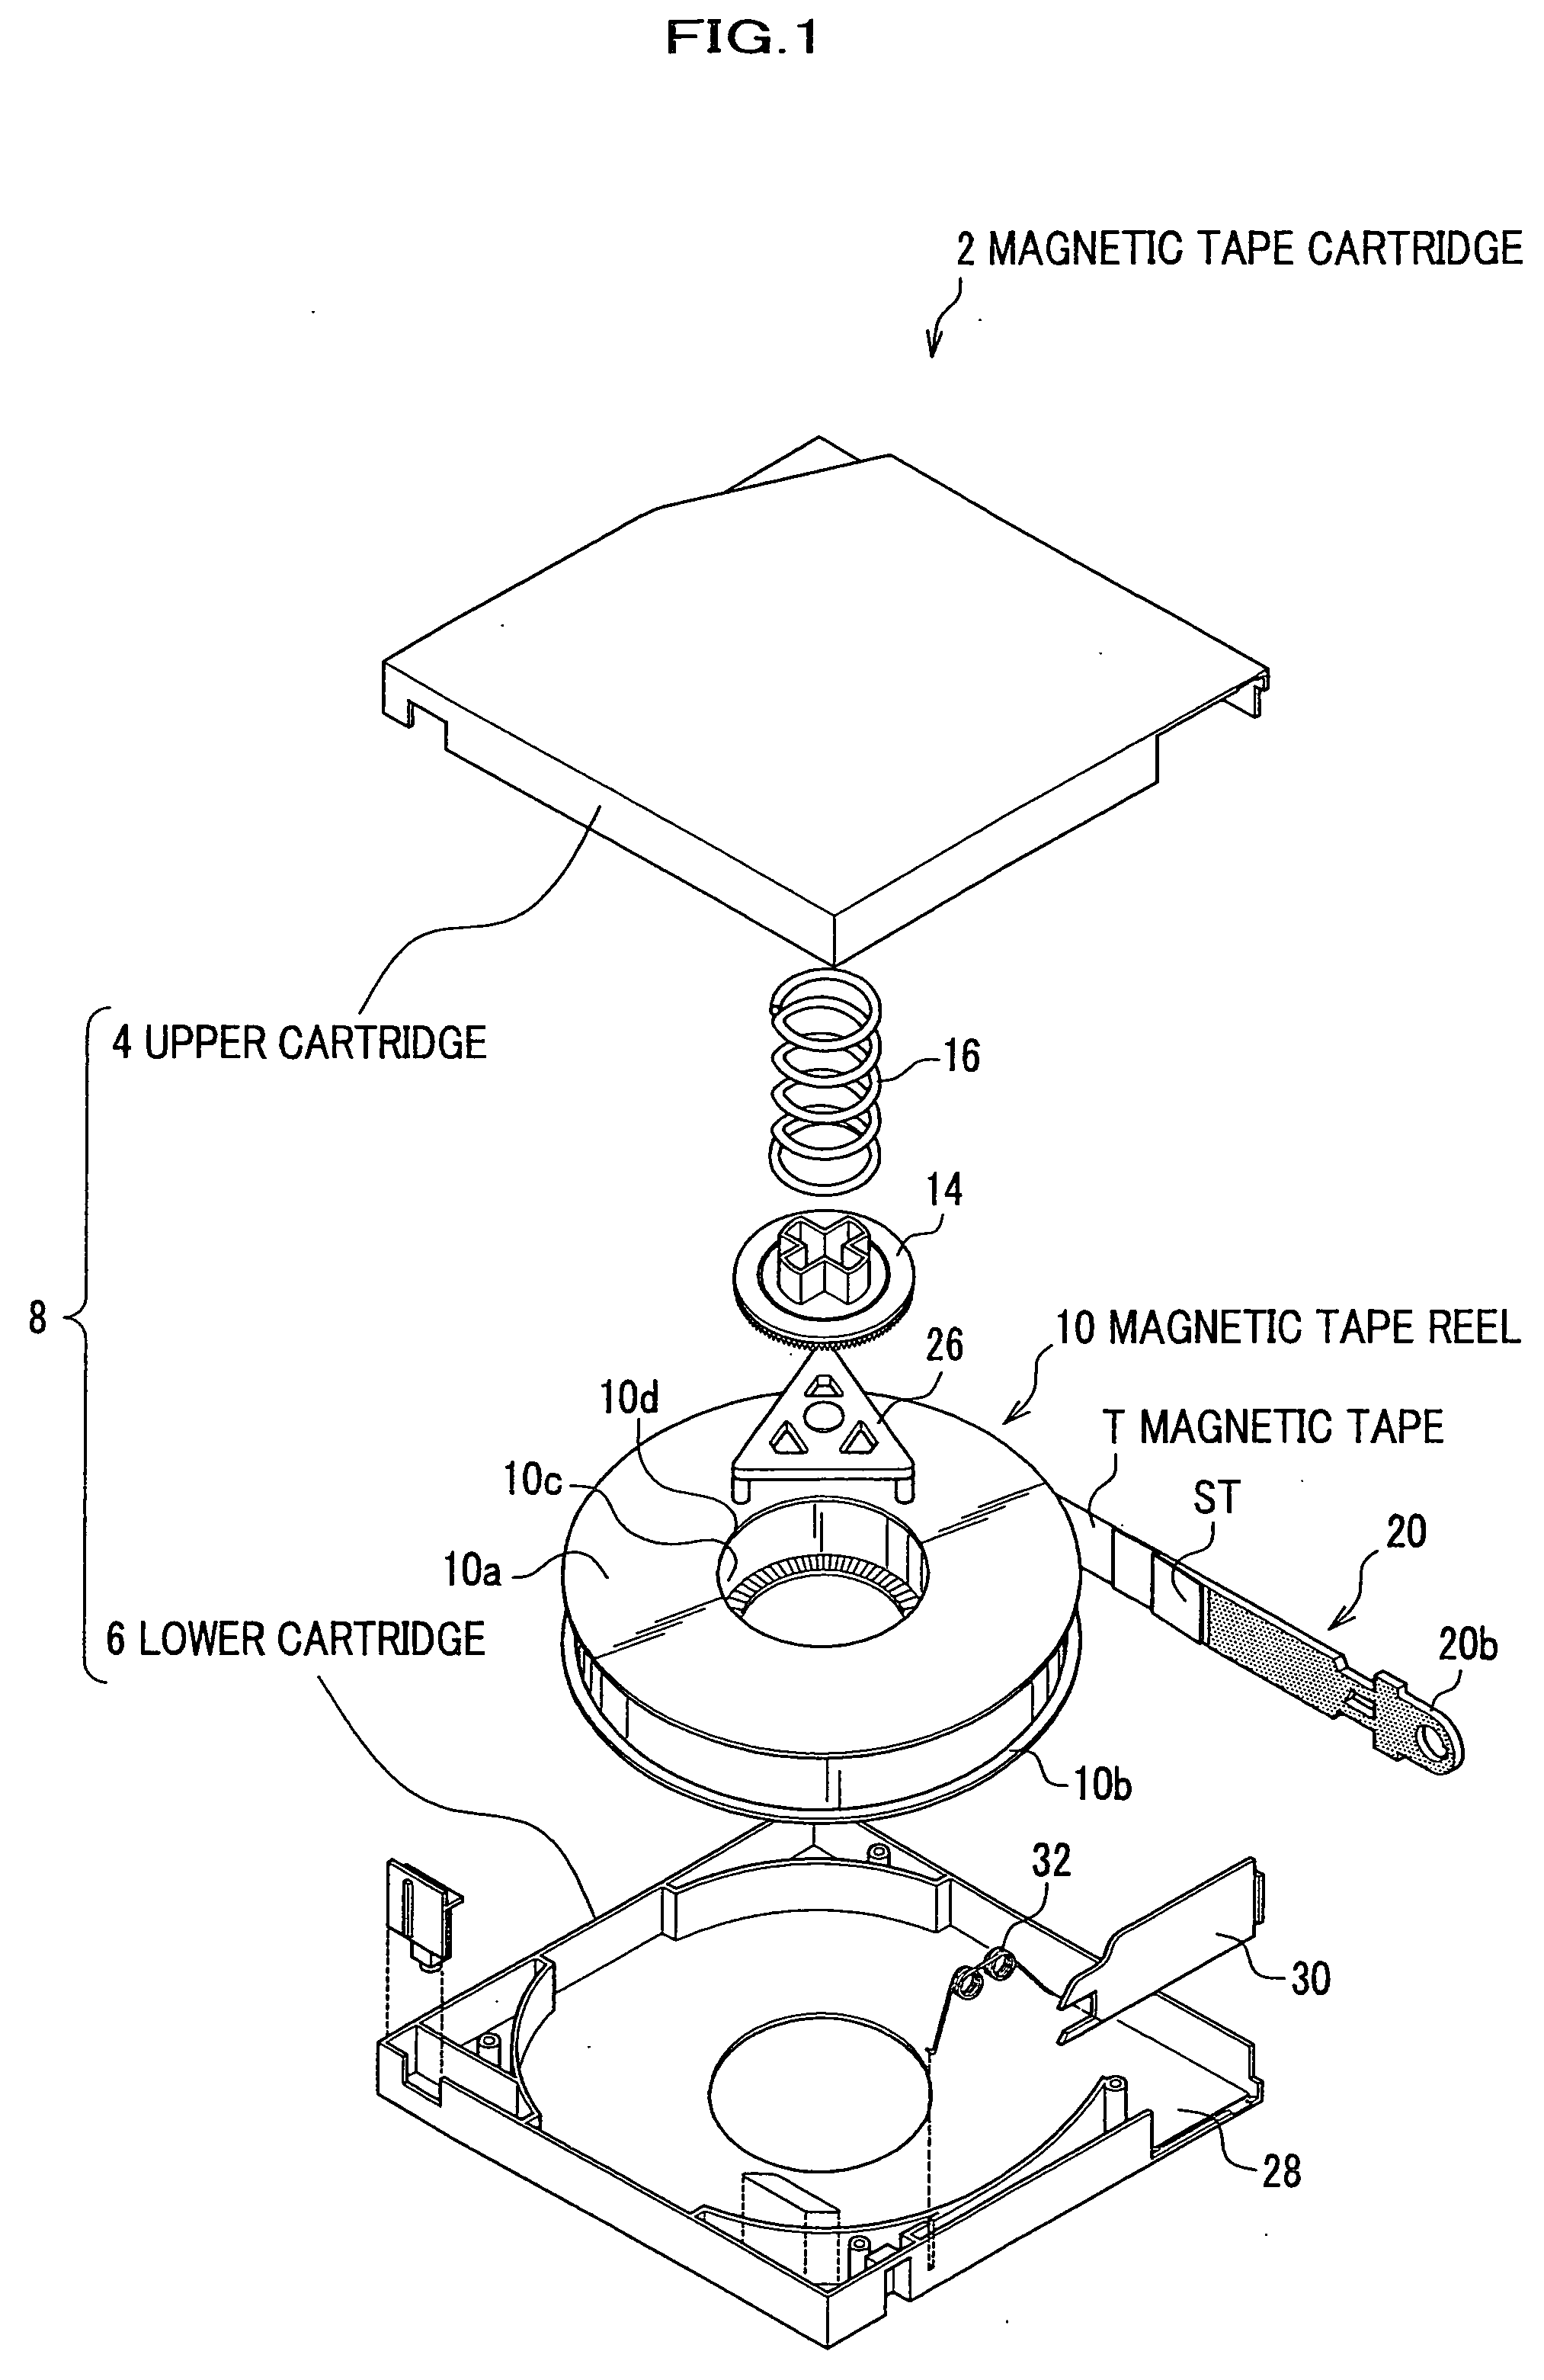 Leader tape, method for manufacturing the same, and magnetic tape cartridge